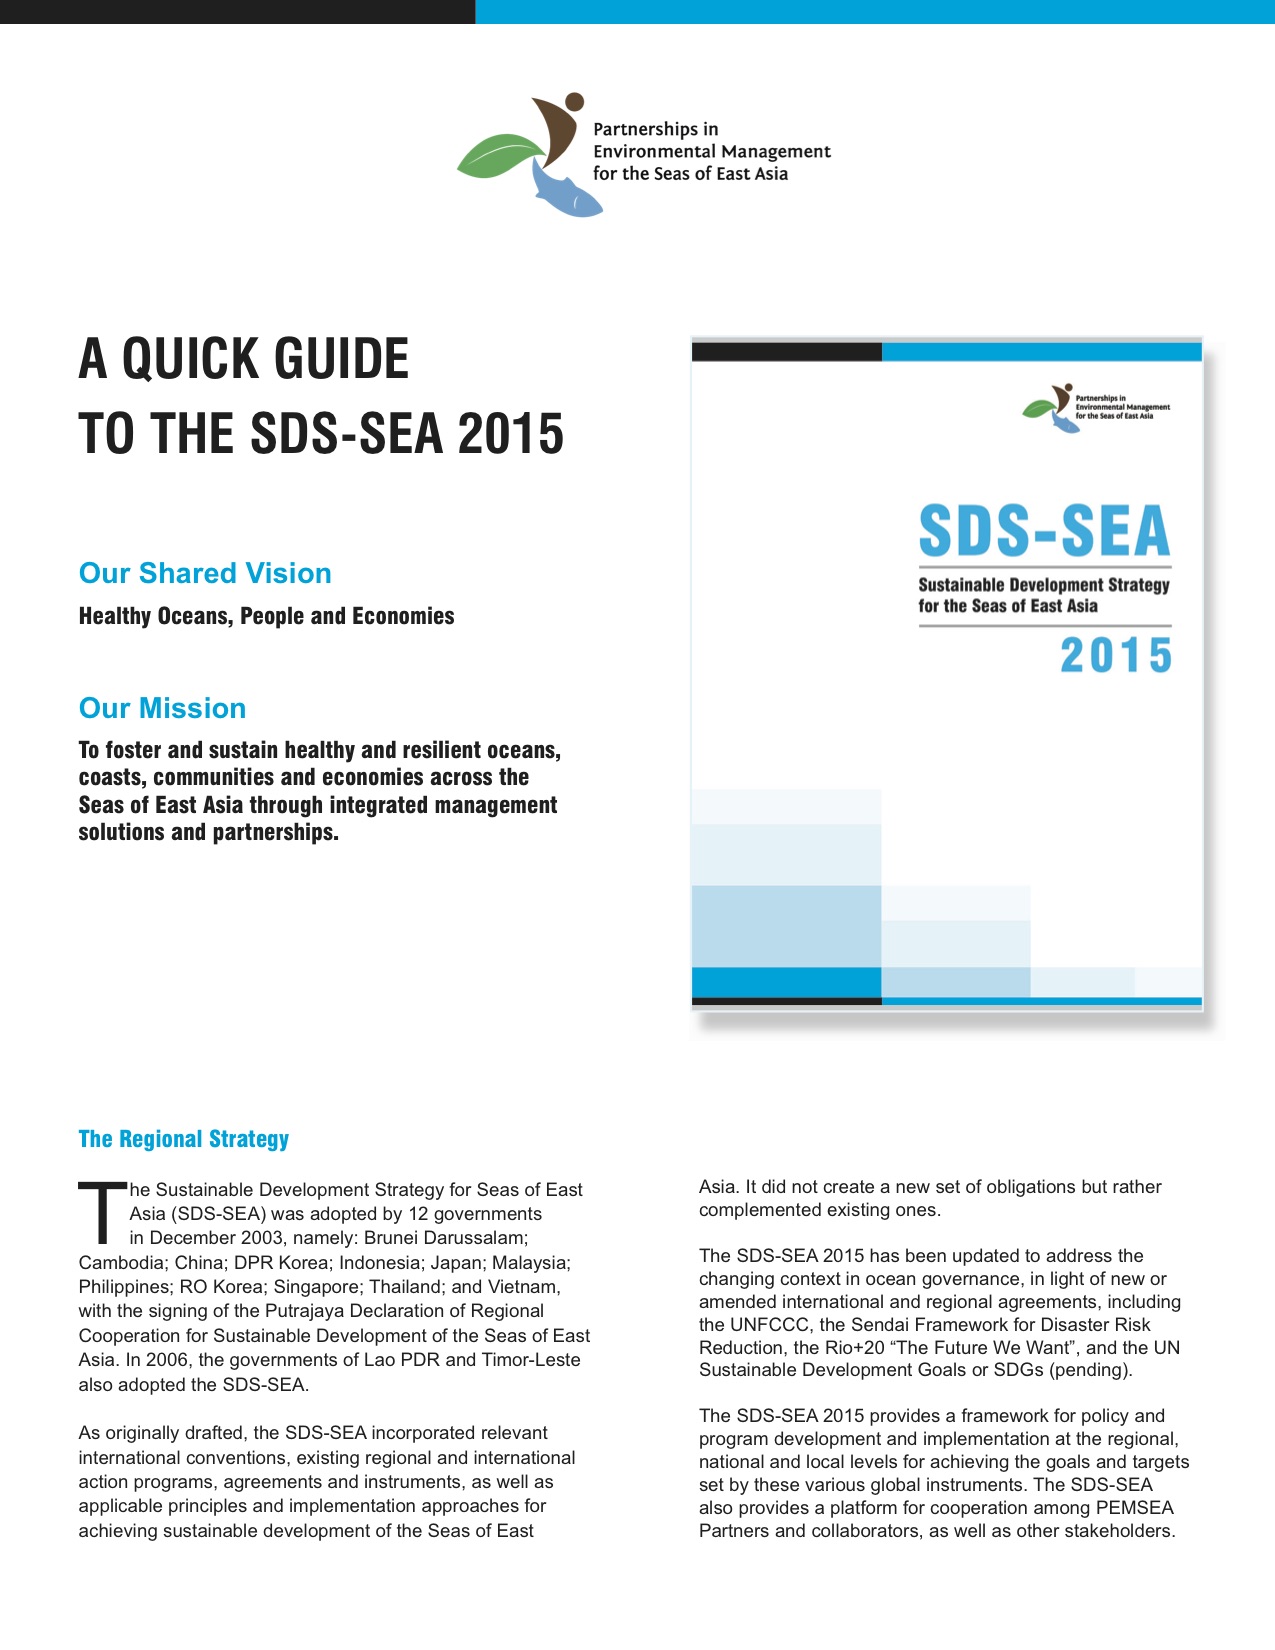 A Quick Guide to the SDS-SEA 2015